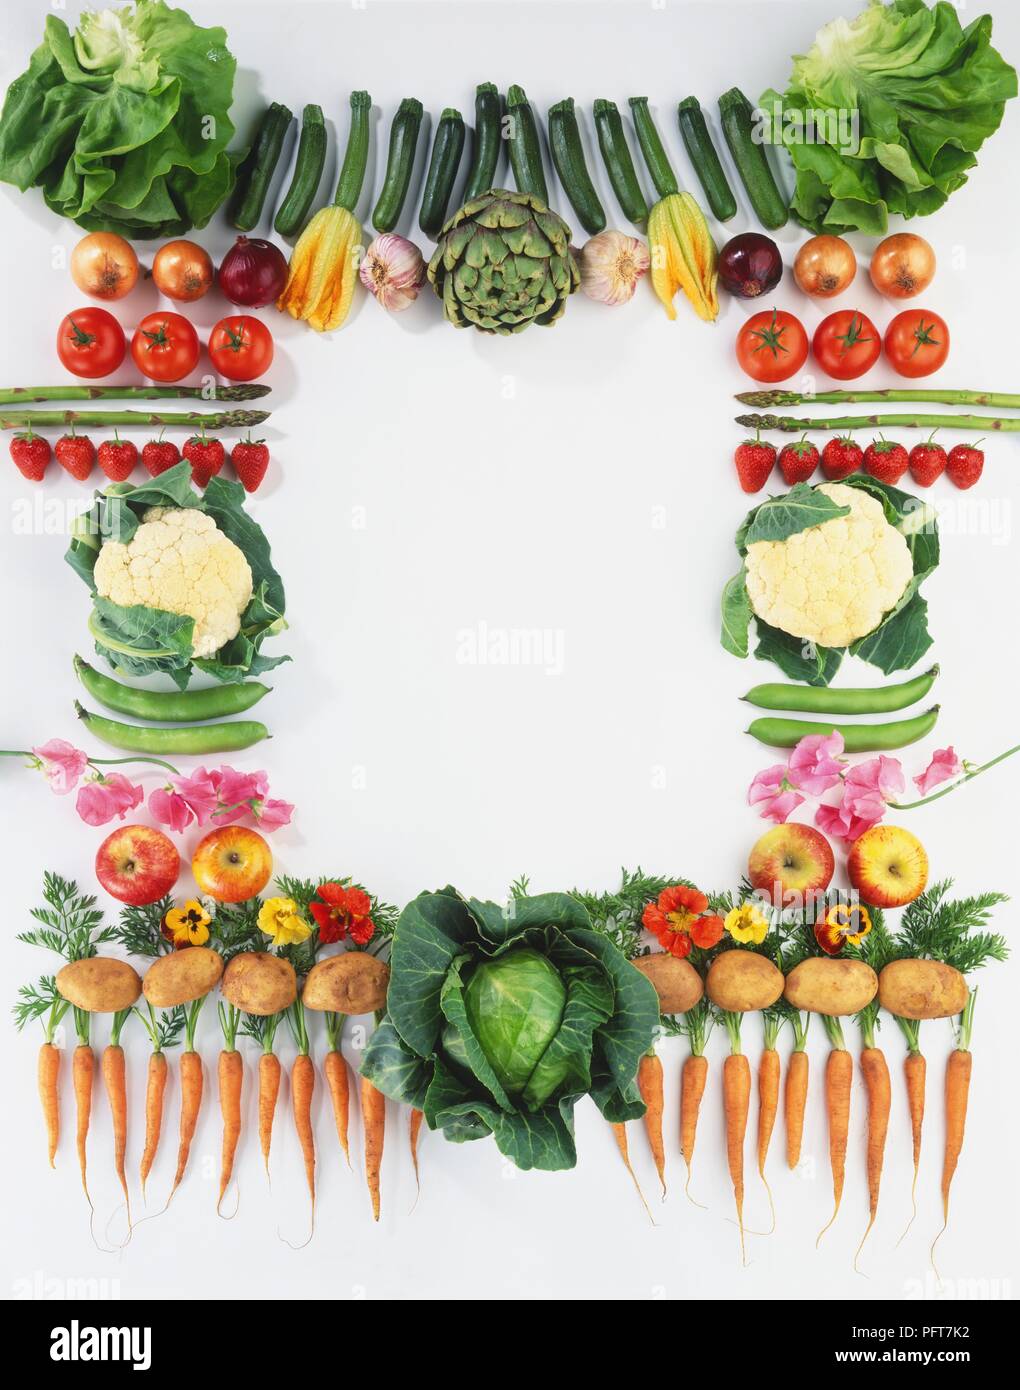 Vegetables, fruit and flowers arranged in a rectangular shape Stock Photo